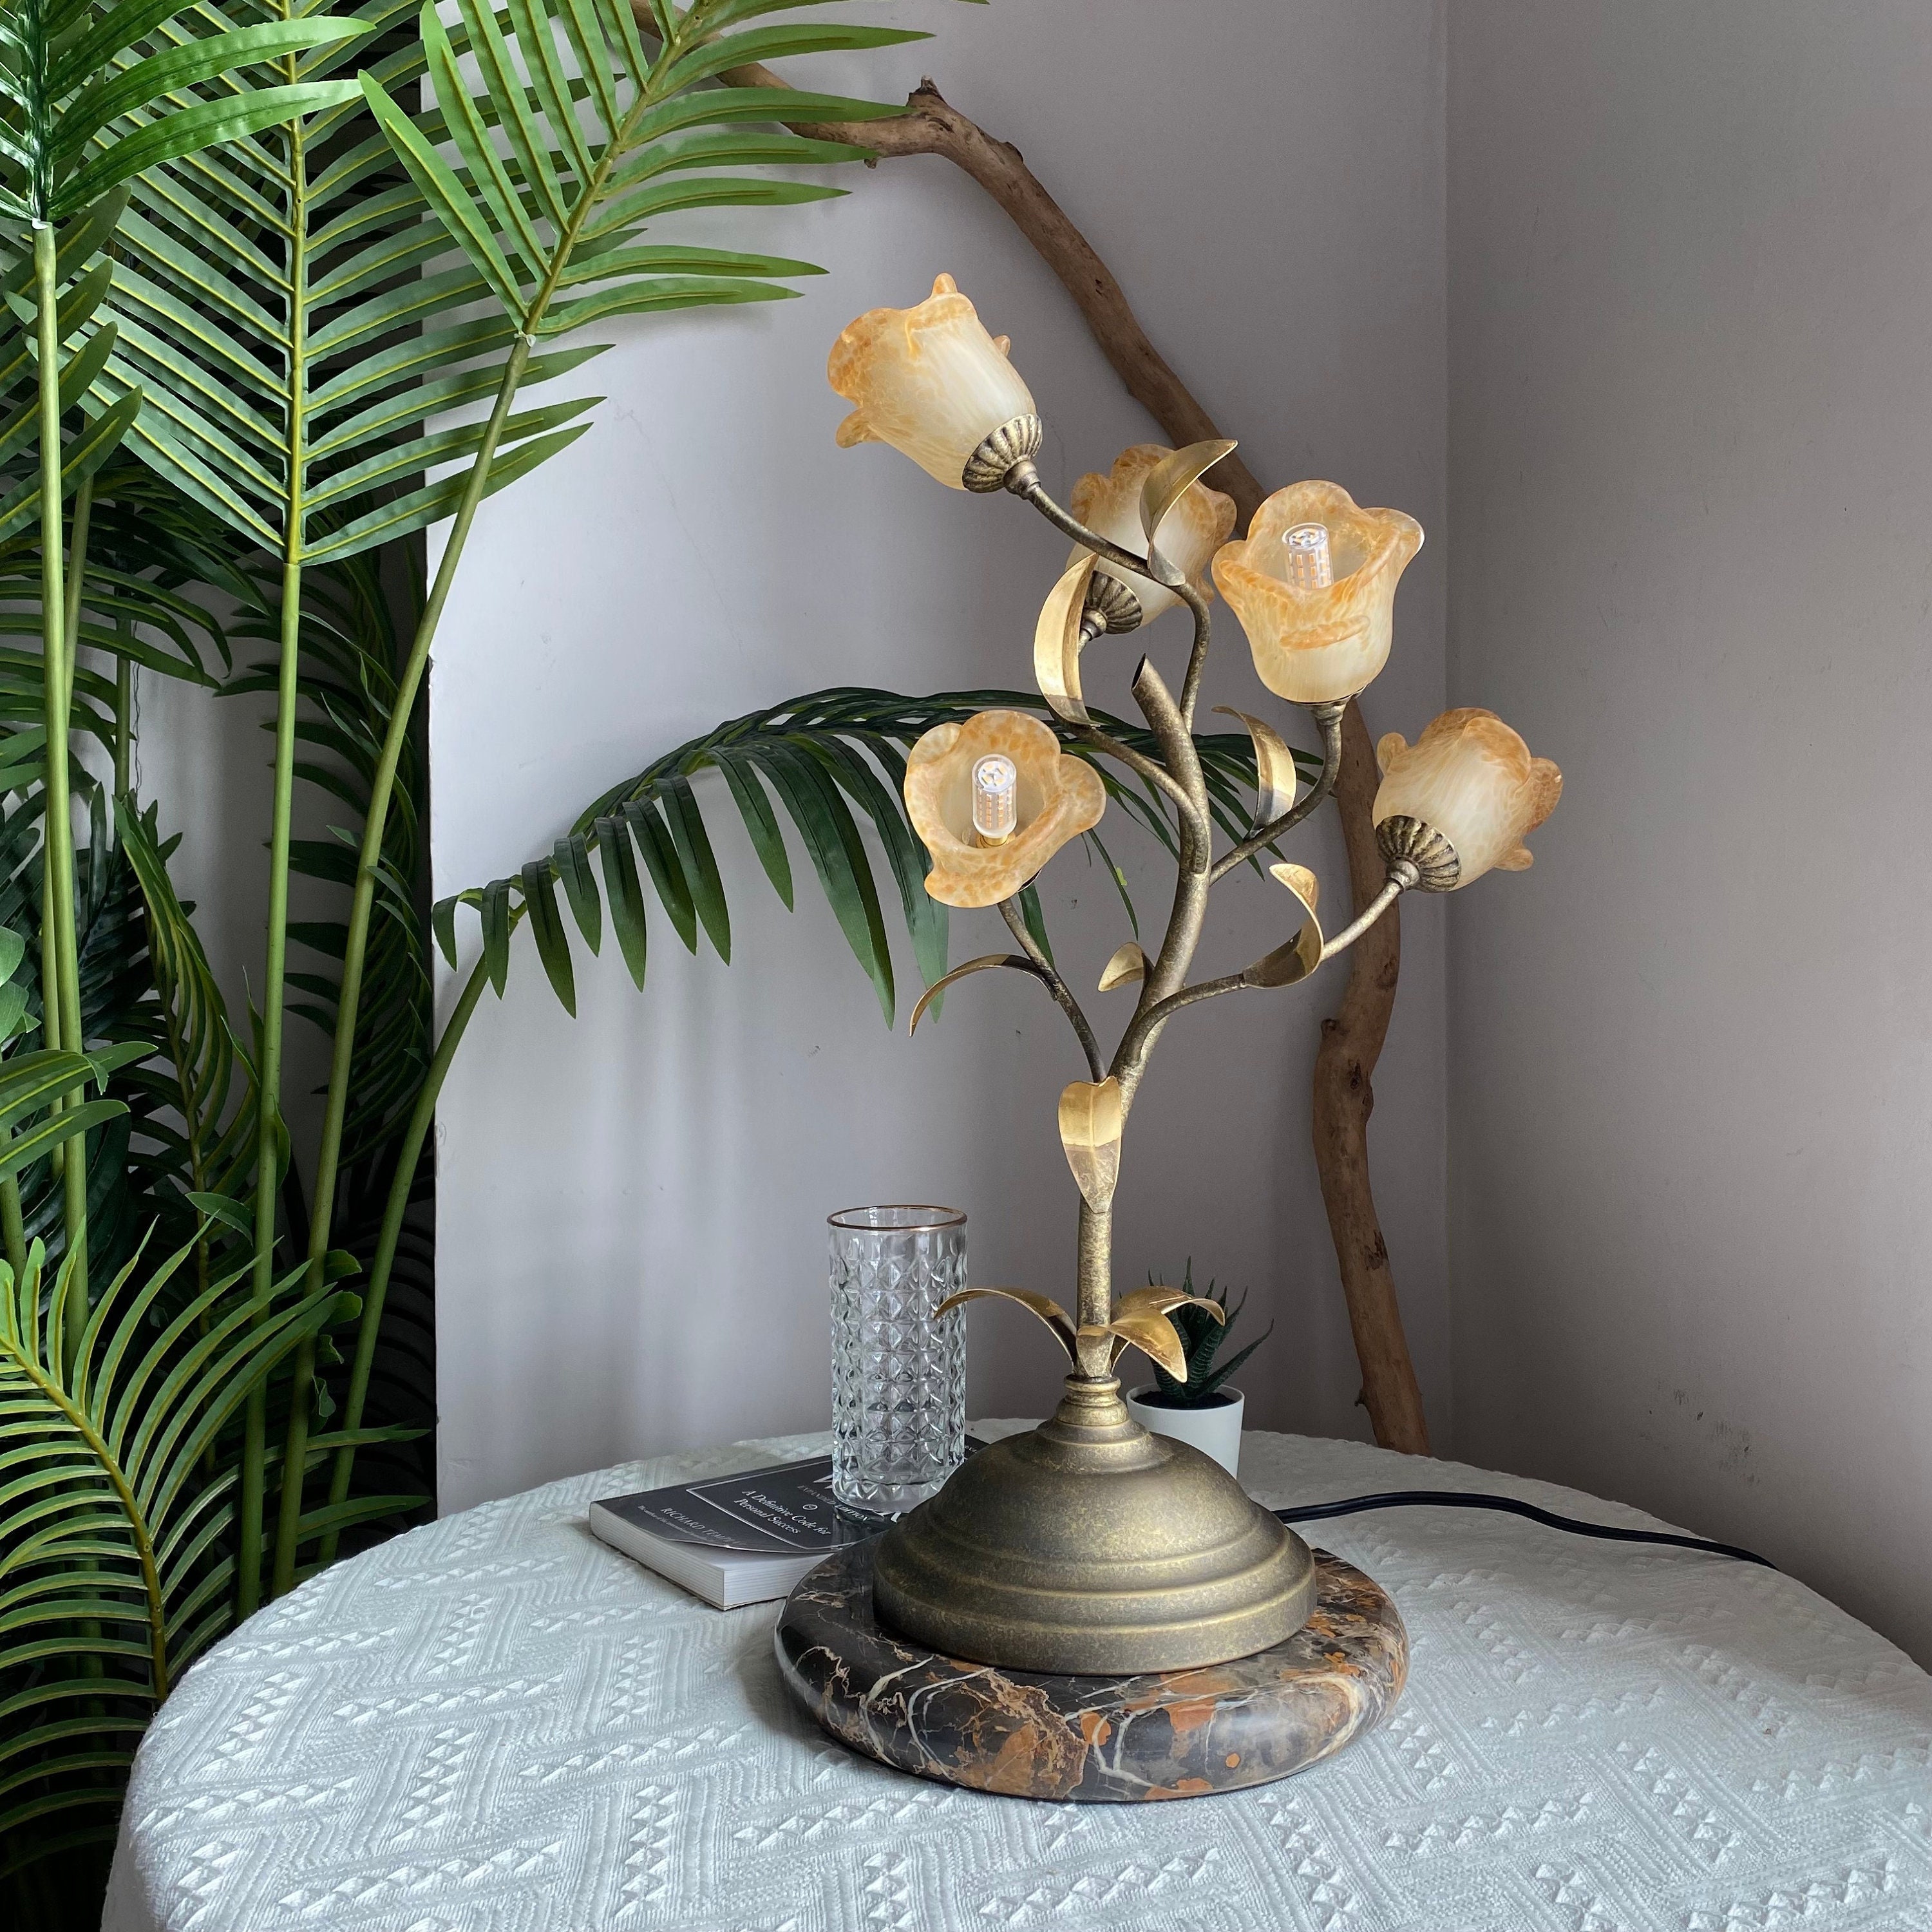 Antique Table Lamp With Glass Flower Shades - Brass Bedside Lamp - Cute Nightstand Lamp For Living Room, Bedroomthumbnail